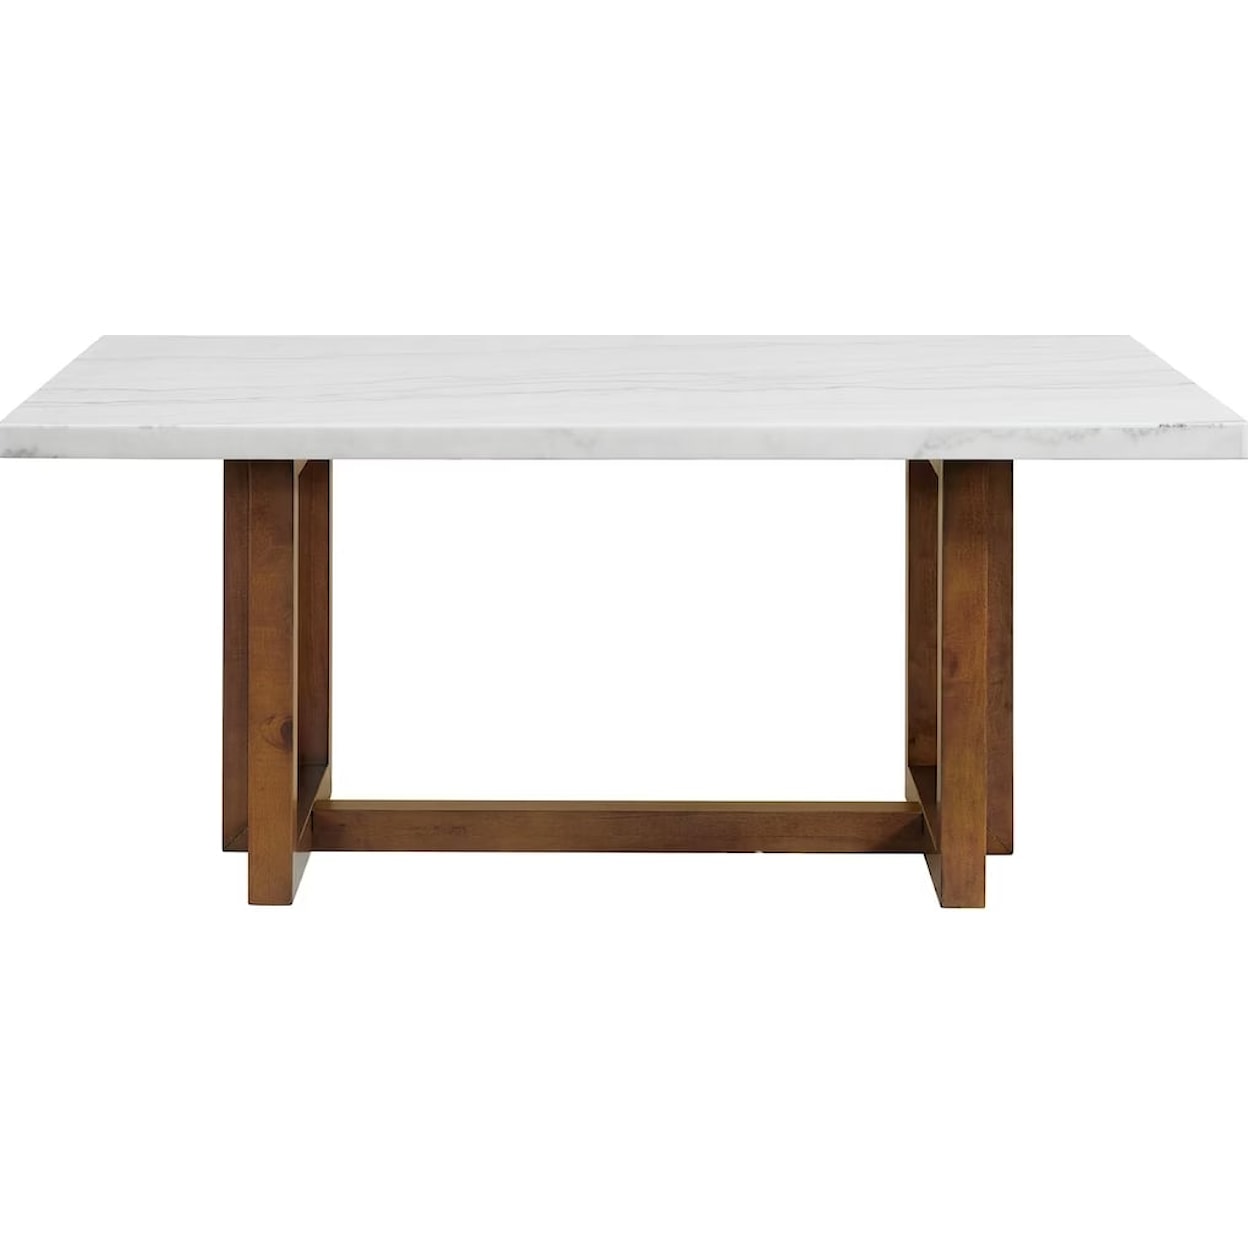 Elements International Morris Marble Dining Table